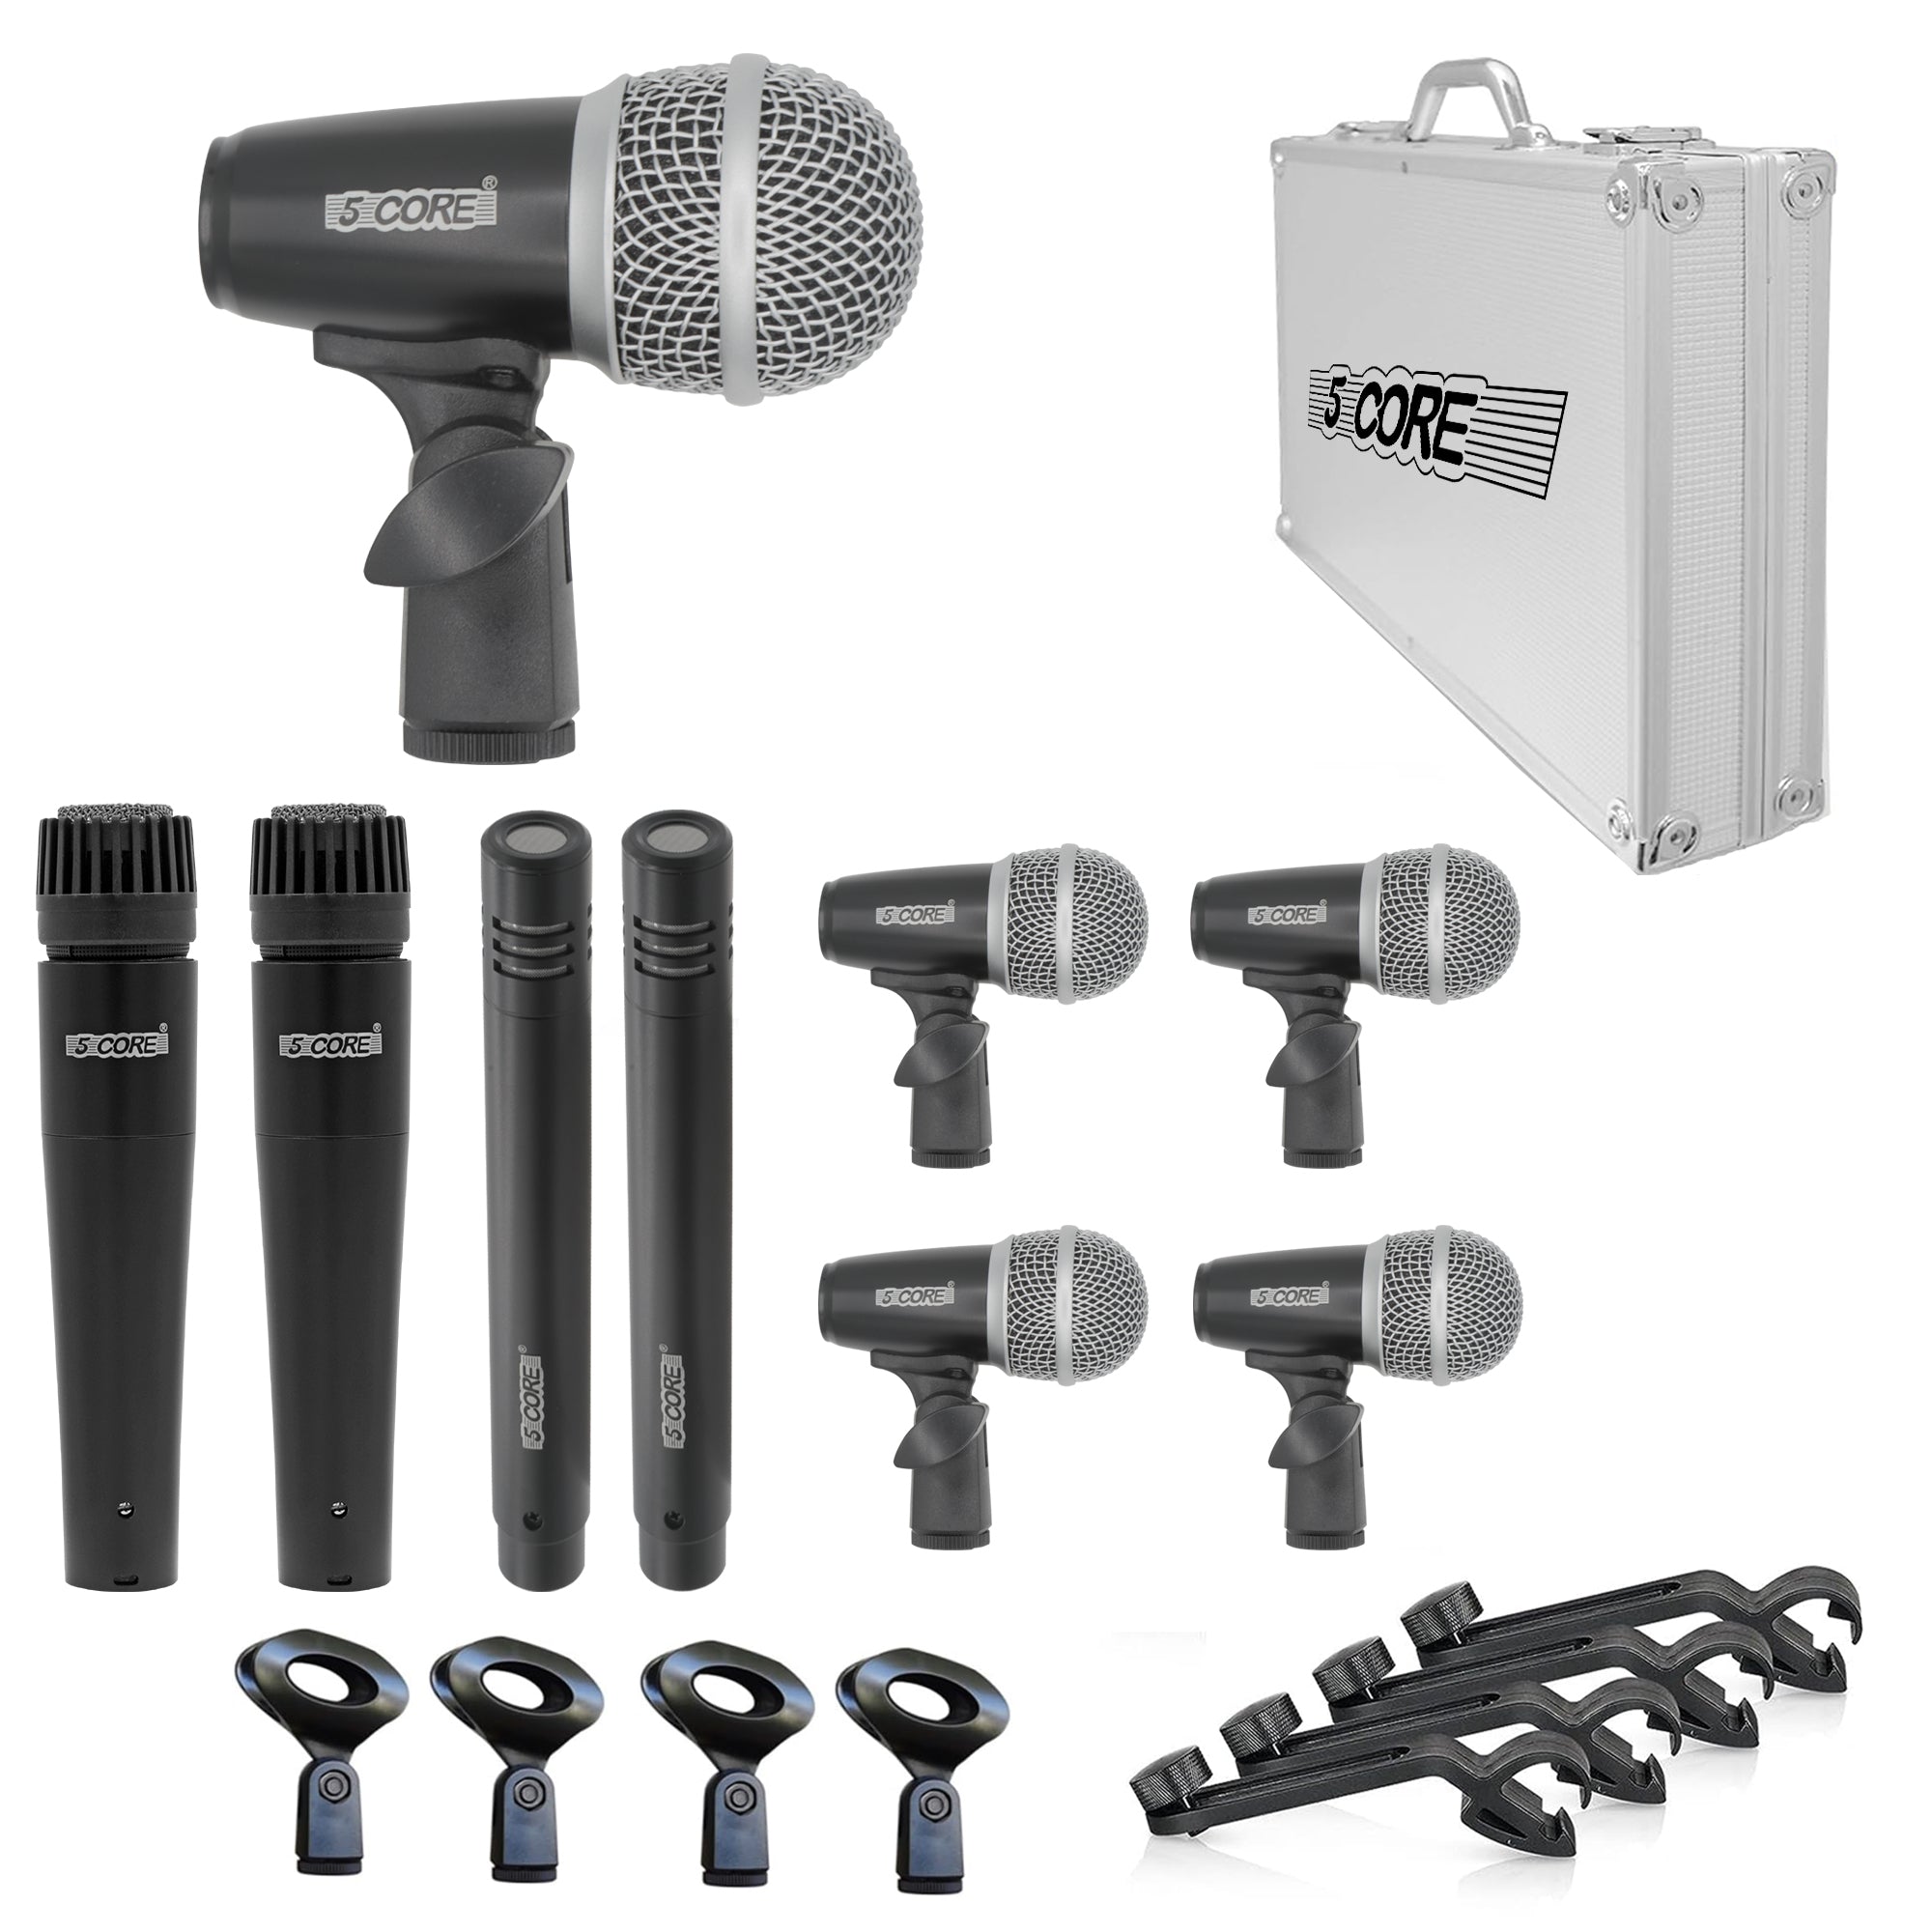 Nine-piece dynamic XLR microphone set tailored for drummers, covering every drum element